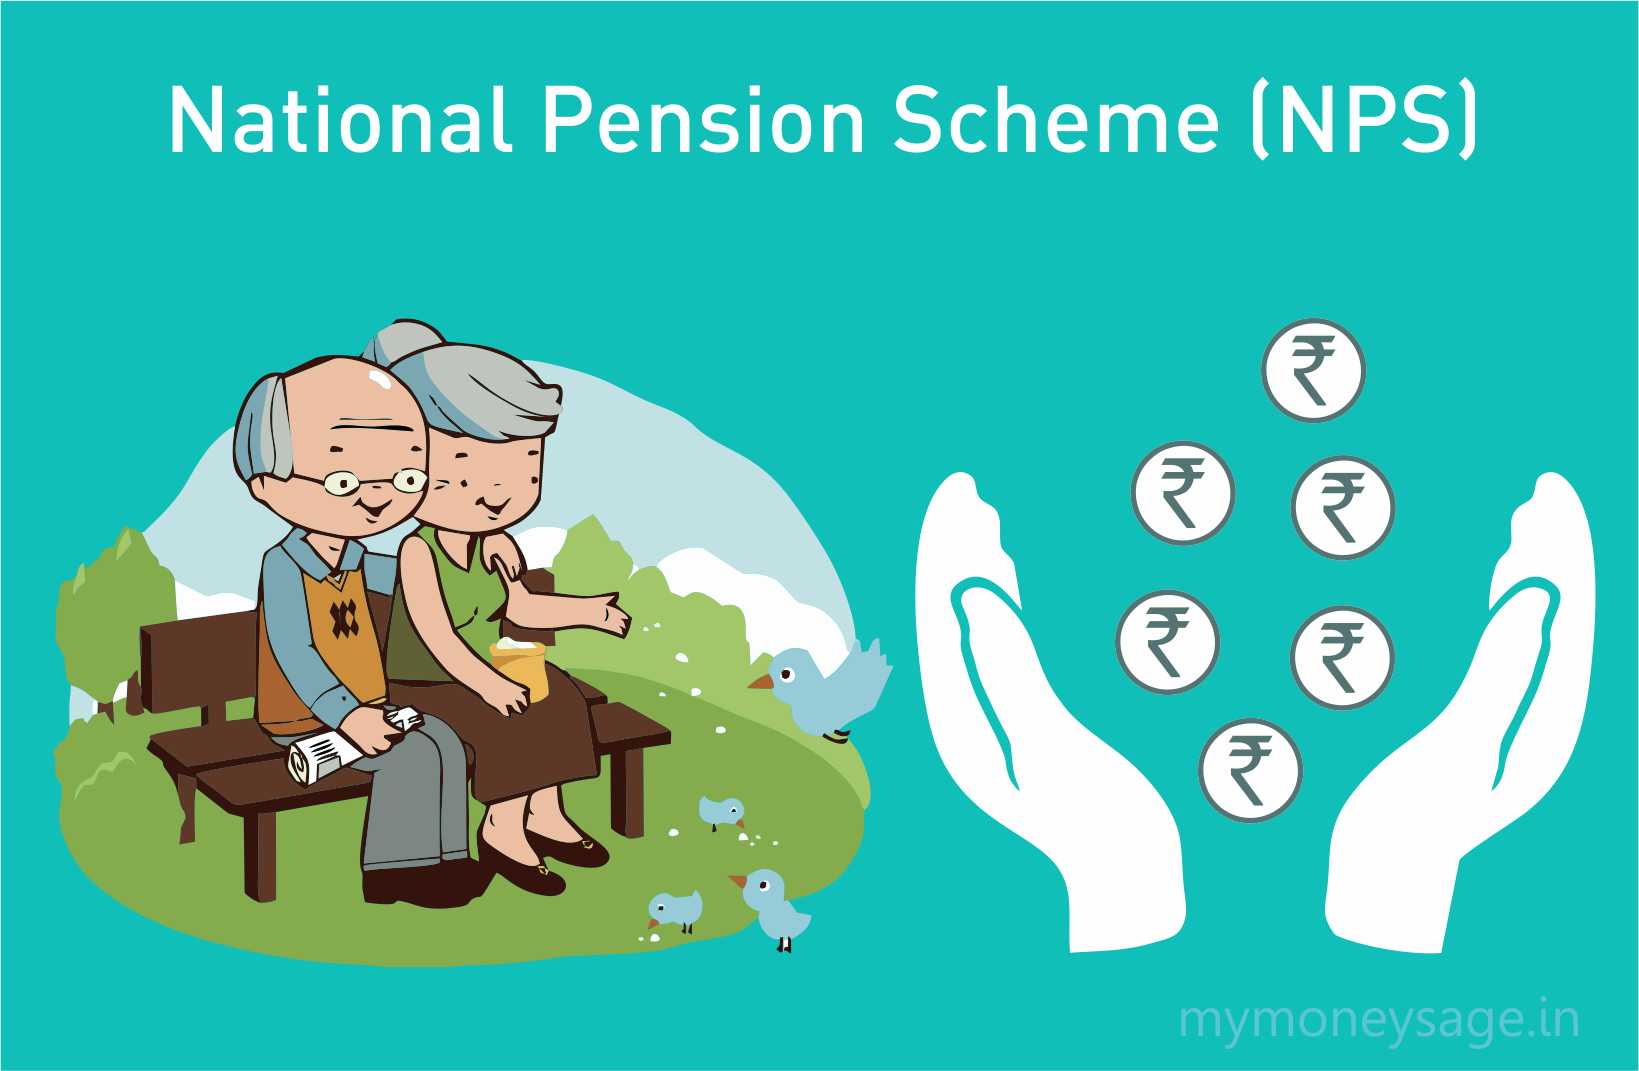 Selection of Annuity Service Provider (ASP) to be exercised by Subscribers upon exit from NPS: PFRDA